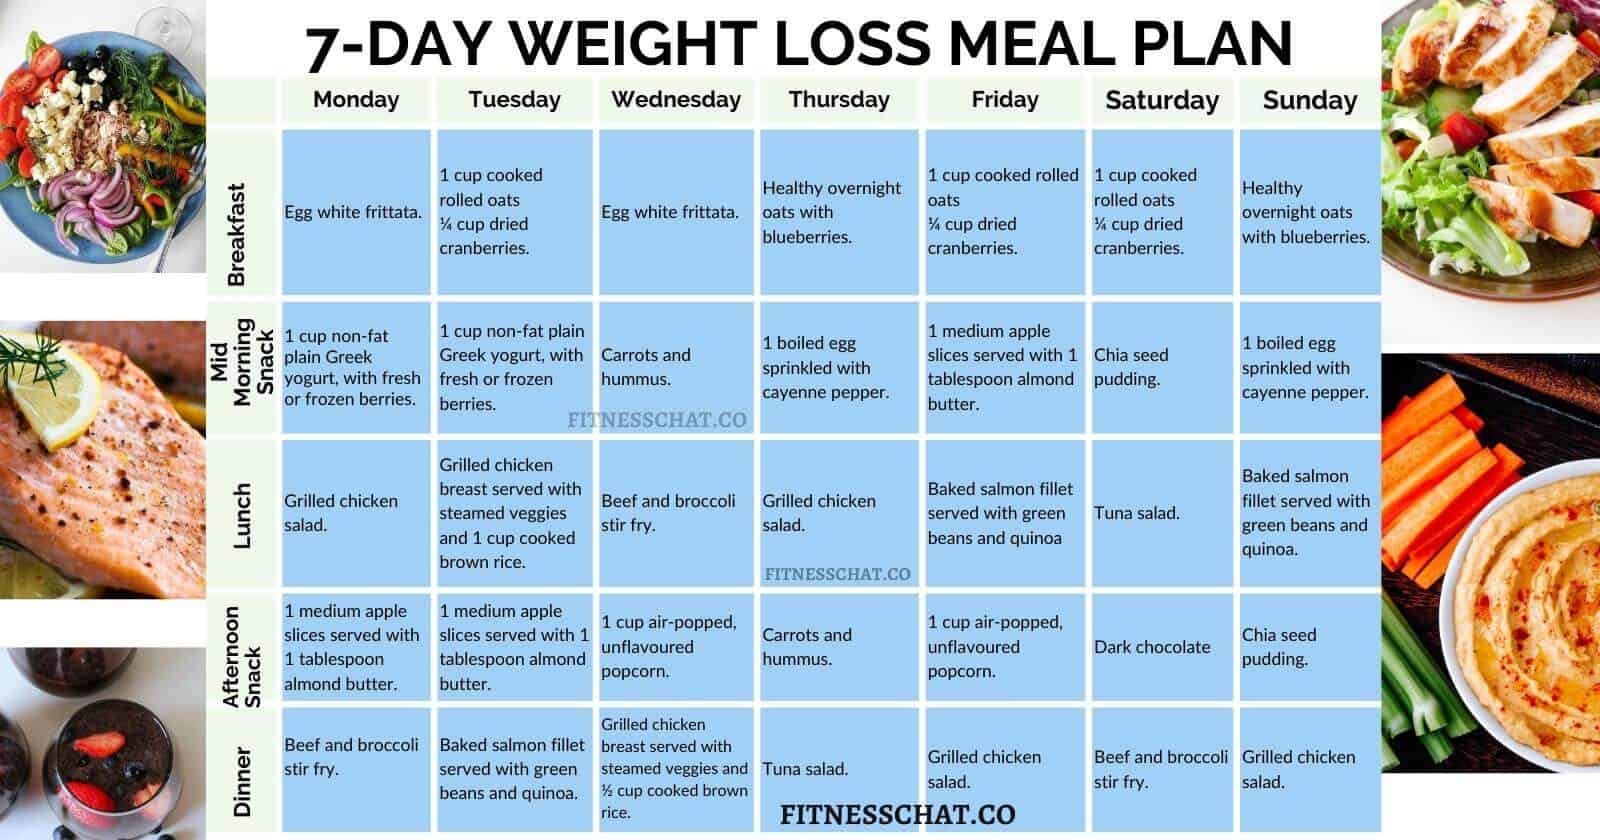 FREE 7-day weight loss meal plan with grocery list